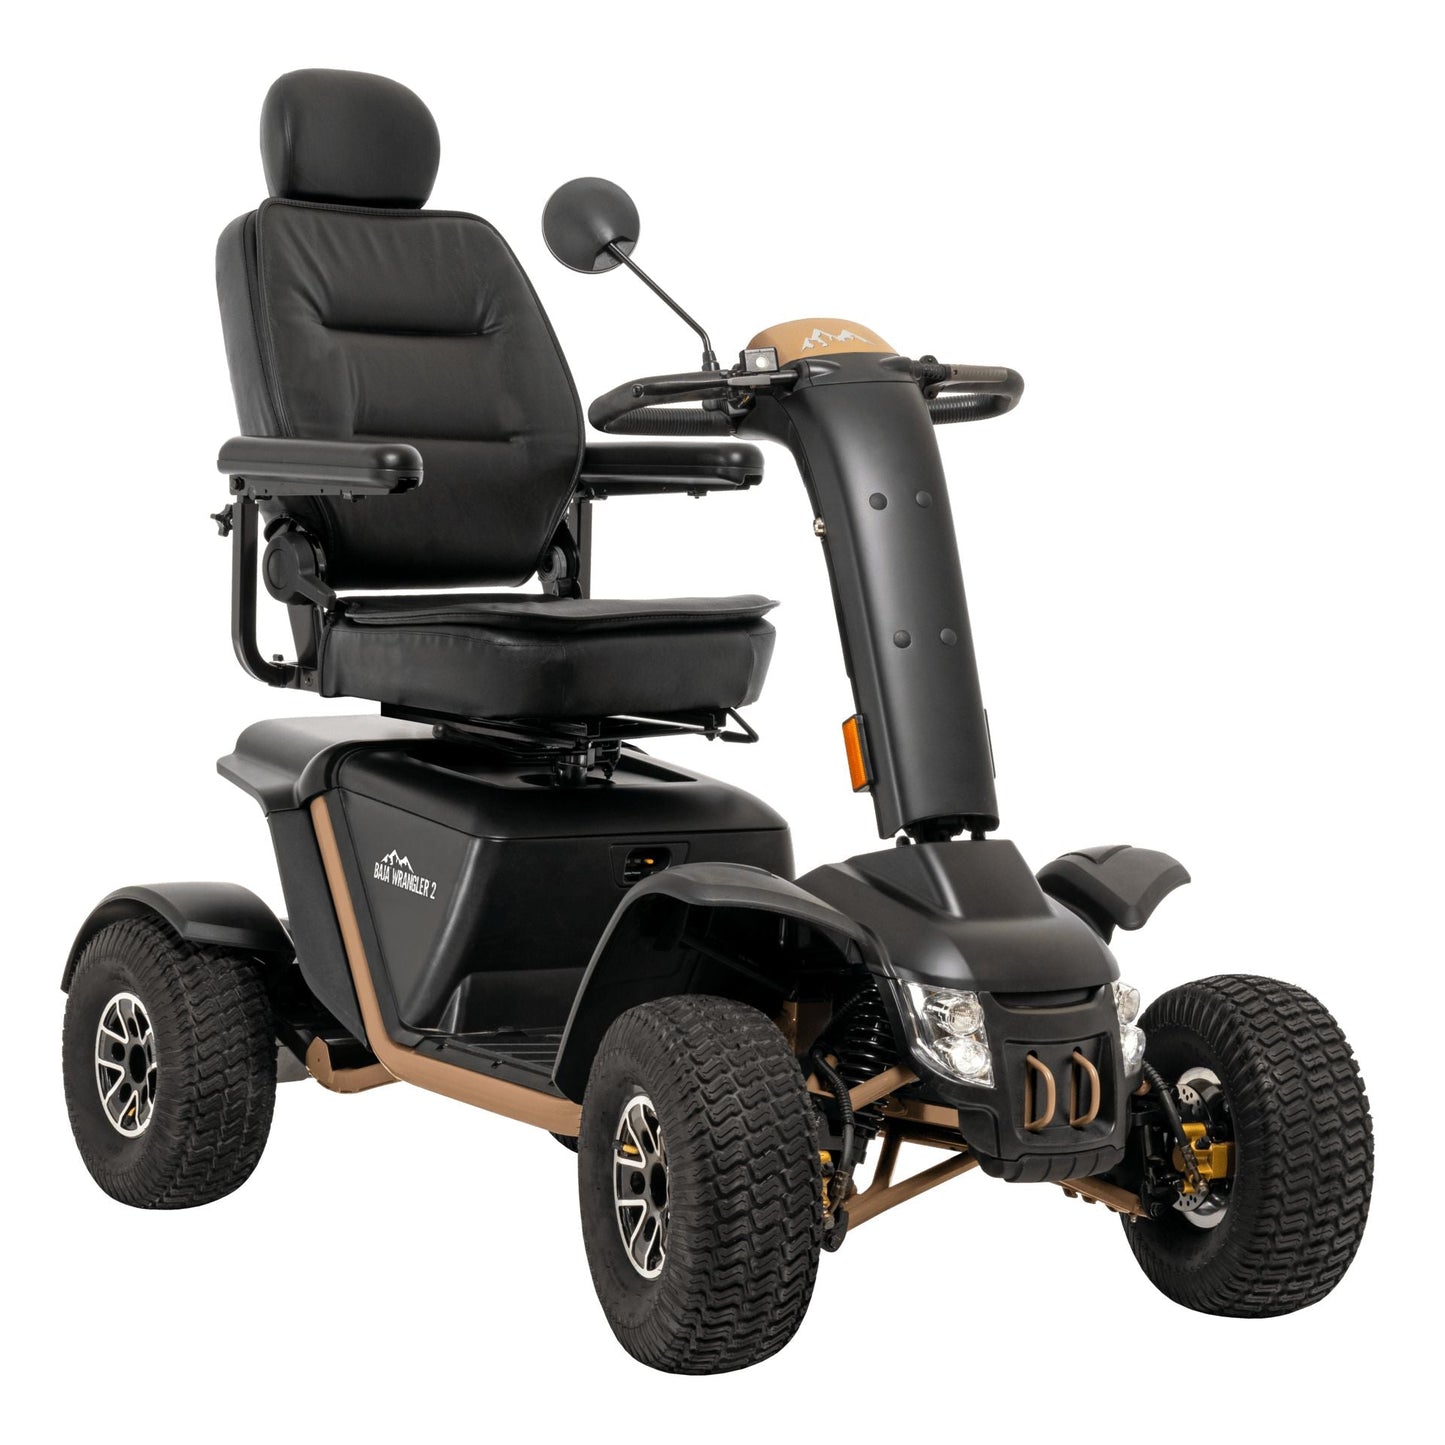 Pride Ranger Mobility Scooter. Rugged, Durable Made For Adventure!